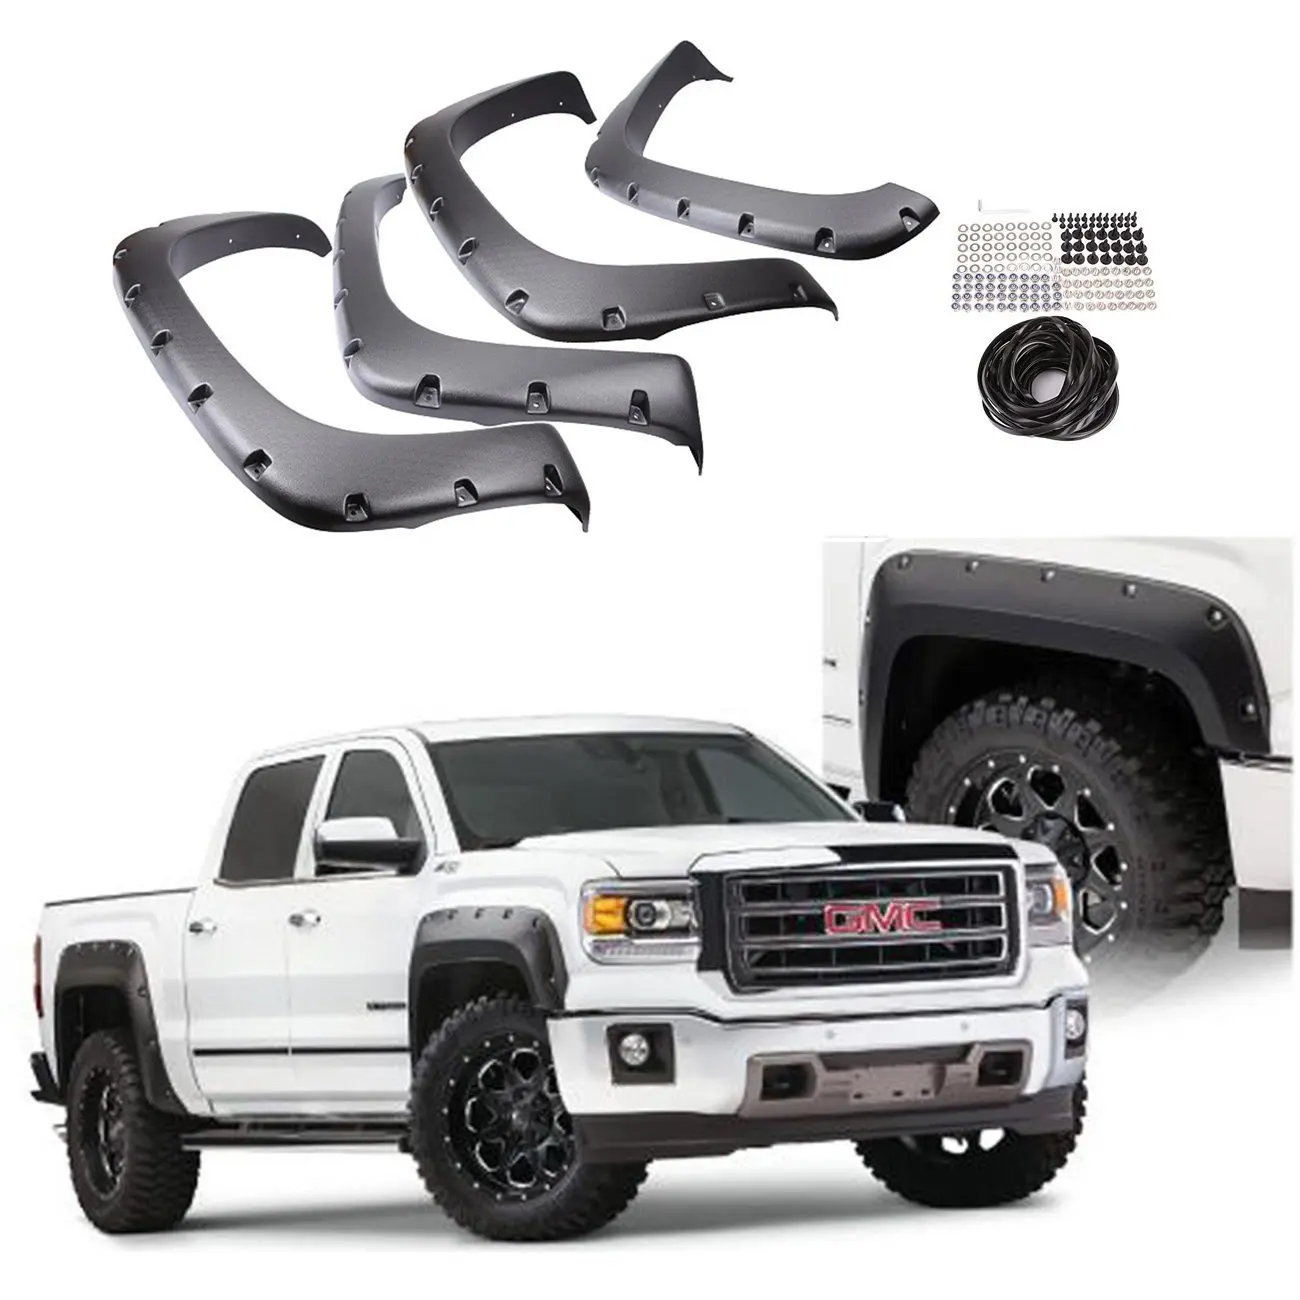 Black Textured Rugged Fender Flares 1999-2006 Chevrolet GMC 1500 2500 3500 Are Chevy 1500 And 2500 Fenders The Same